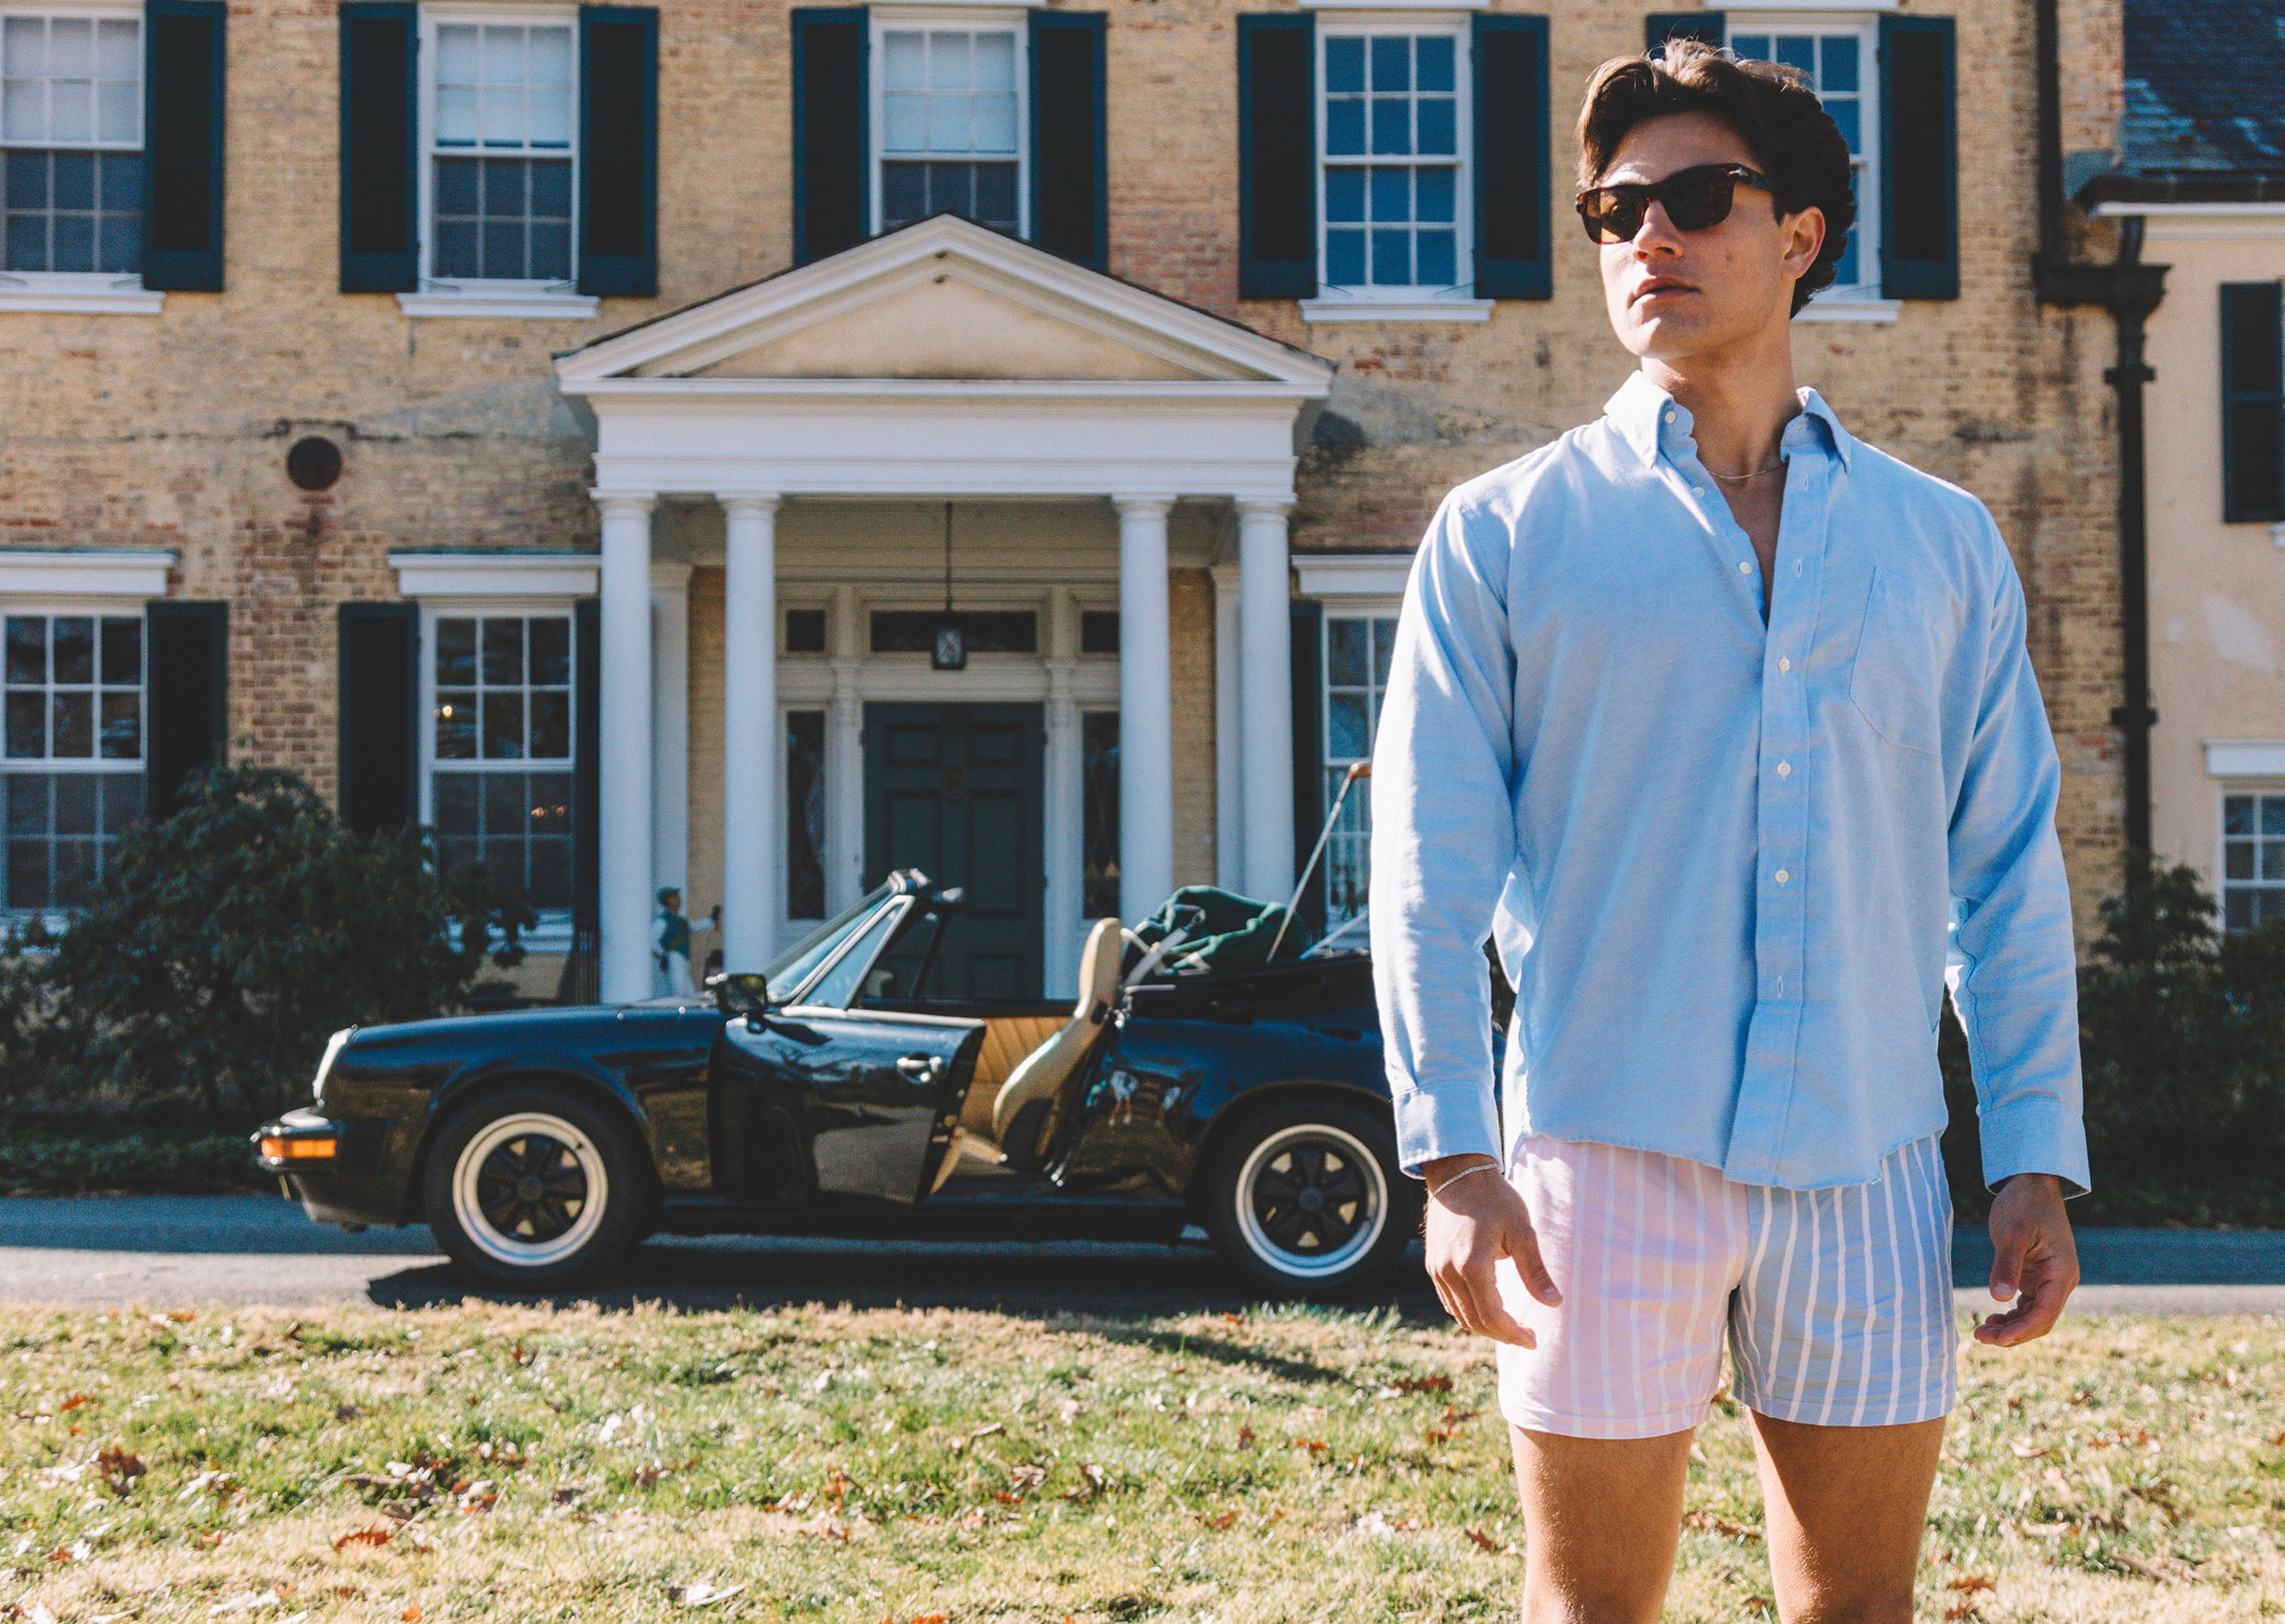 Man standing in front of a house and car wearing Pastel Stripe slim fit boxers and blue dress shirt.